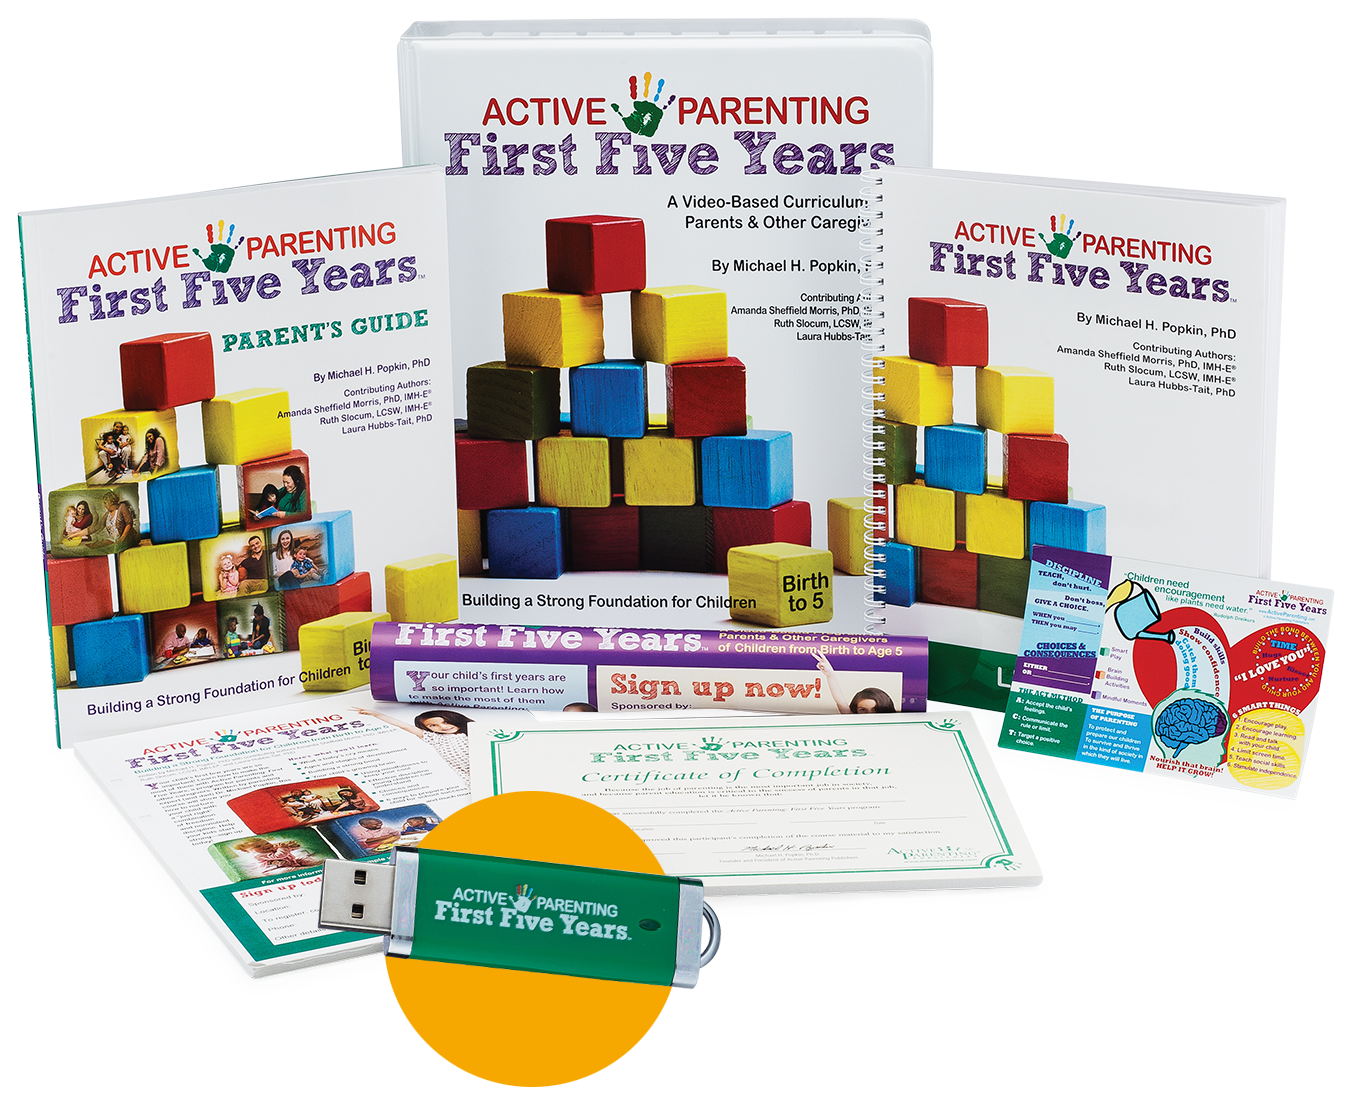 Active Parenting: First Five Years Program Kit (Flash Drive)